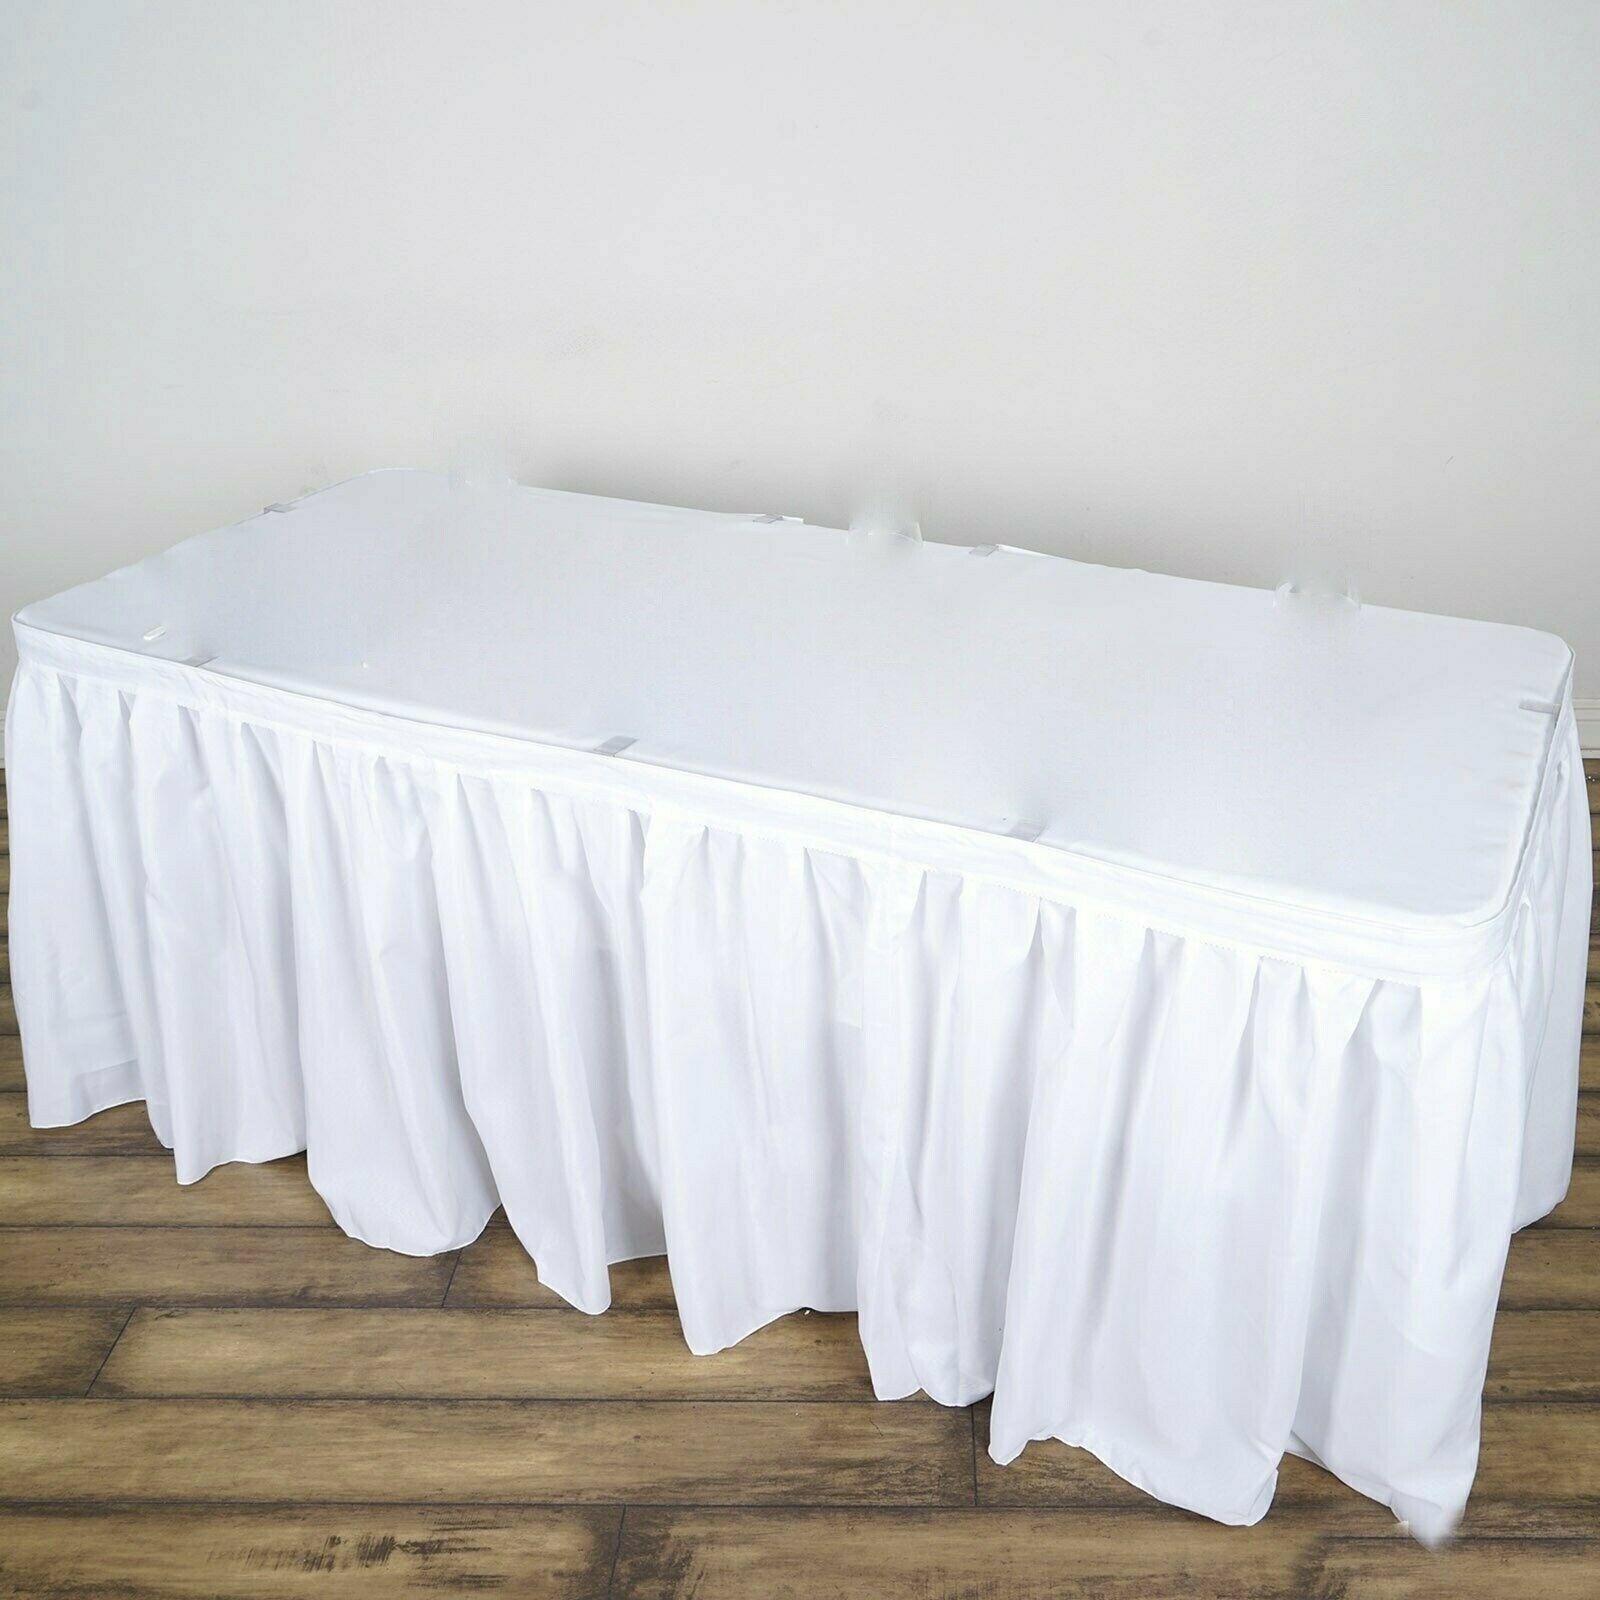 Pack Of 6 X Polyester Pleated Table Skirt White 14ft (172") Event Wedding Party